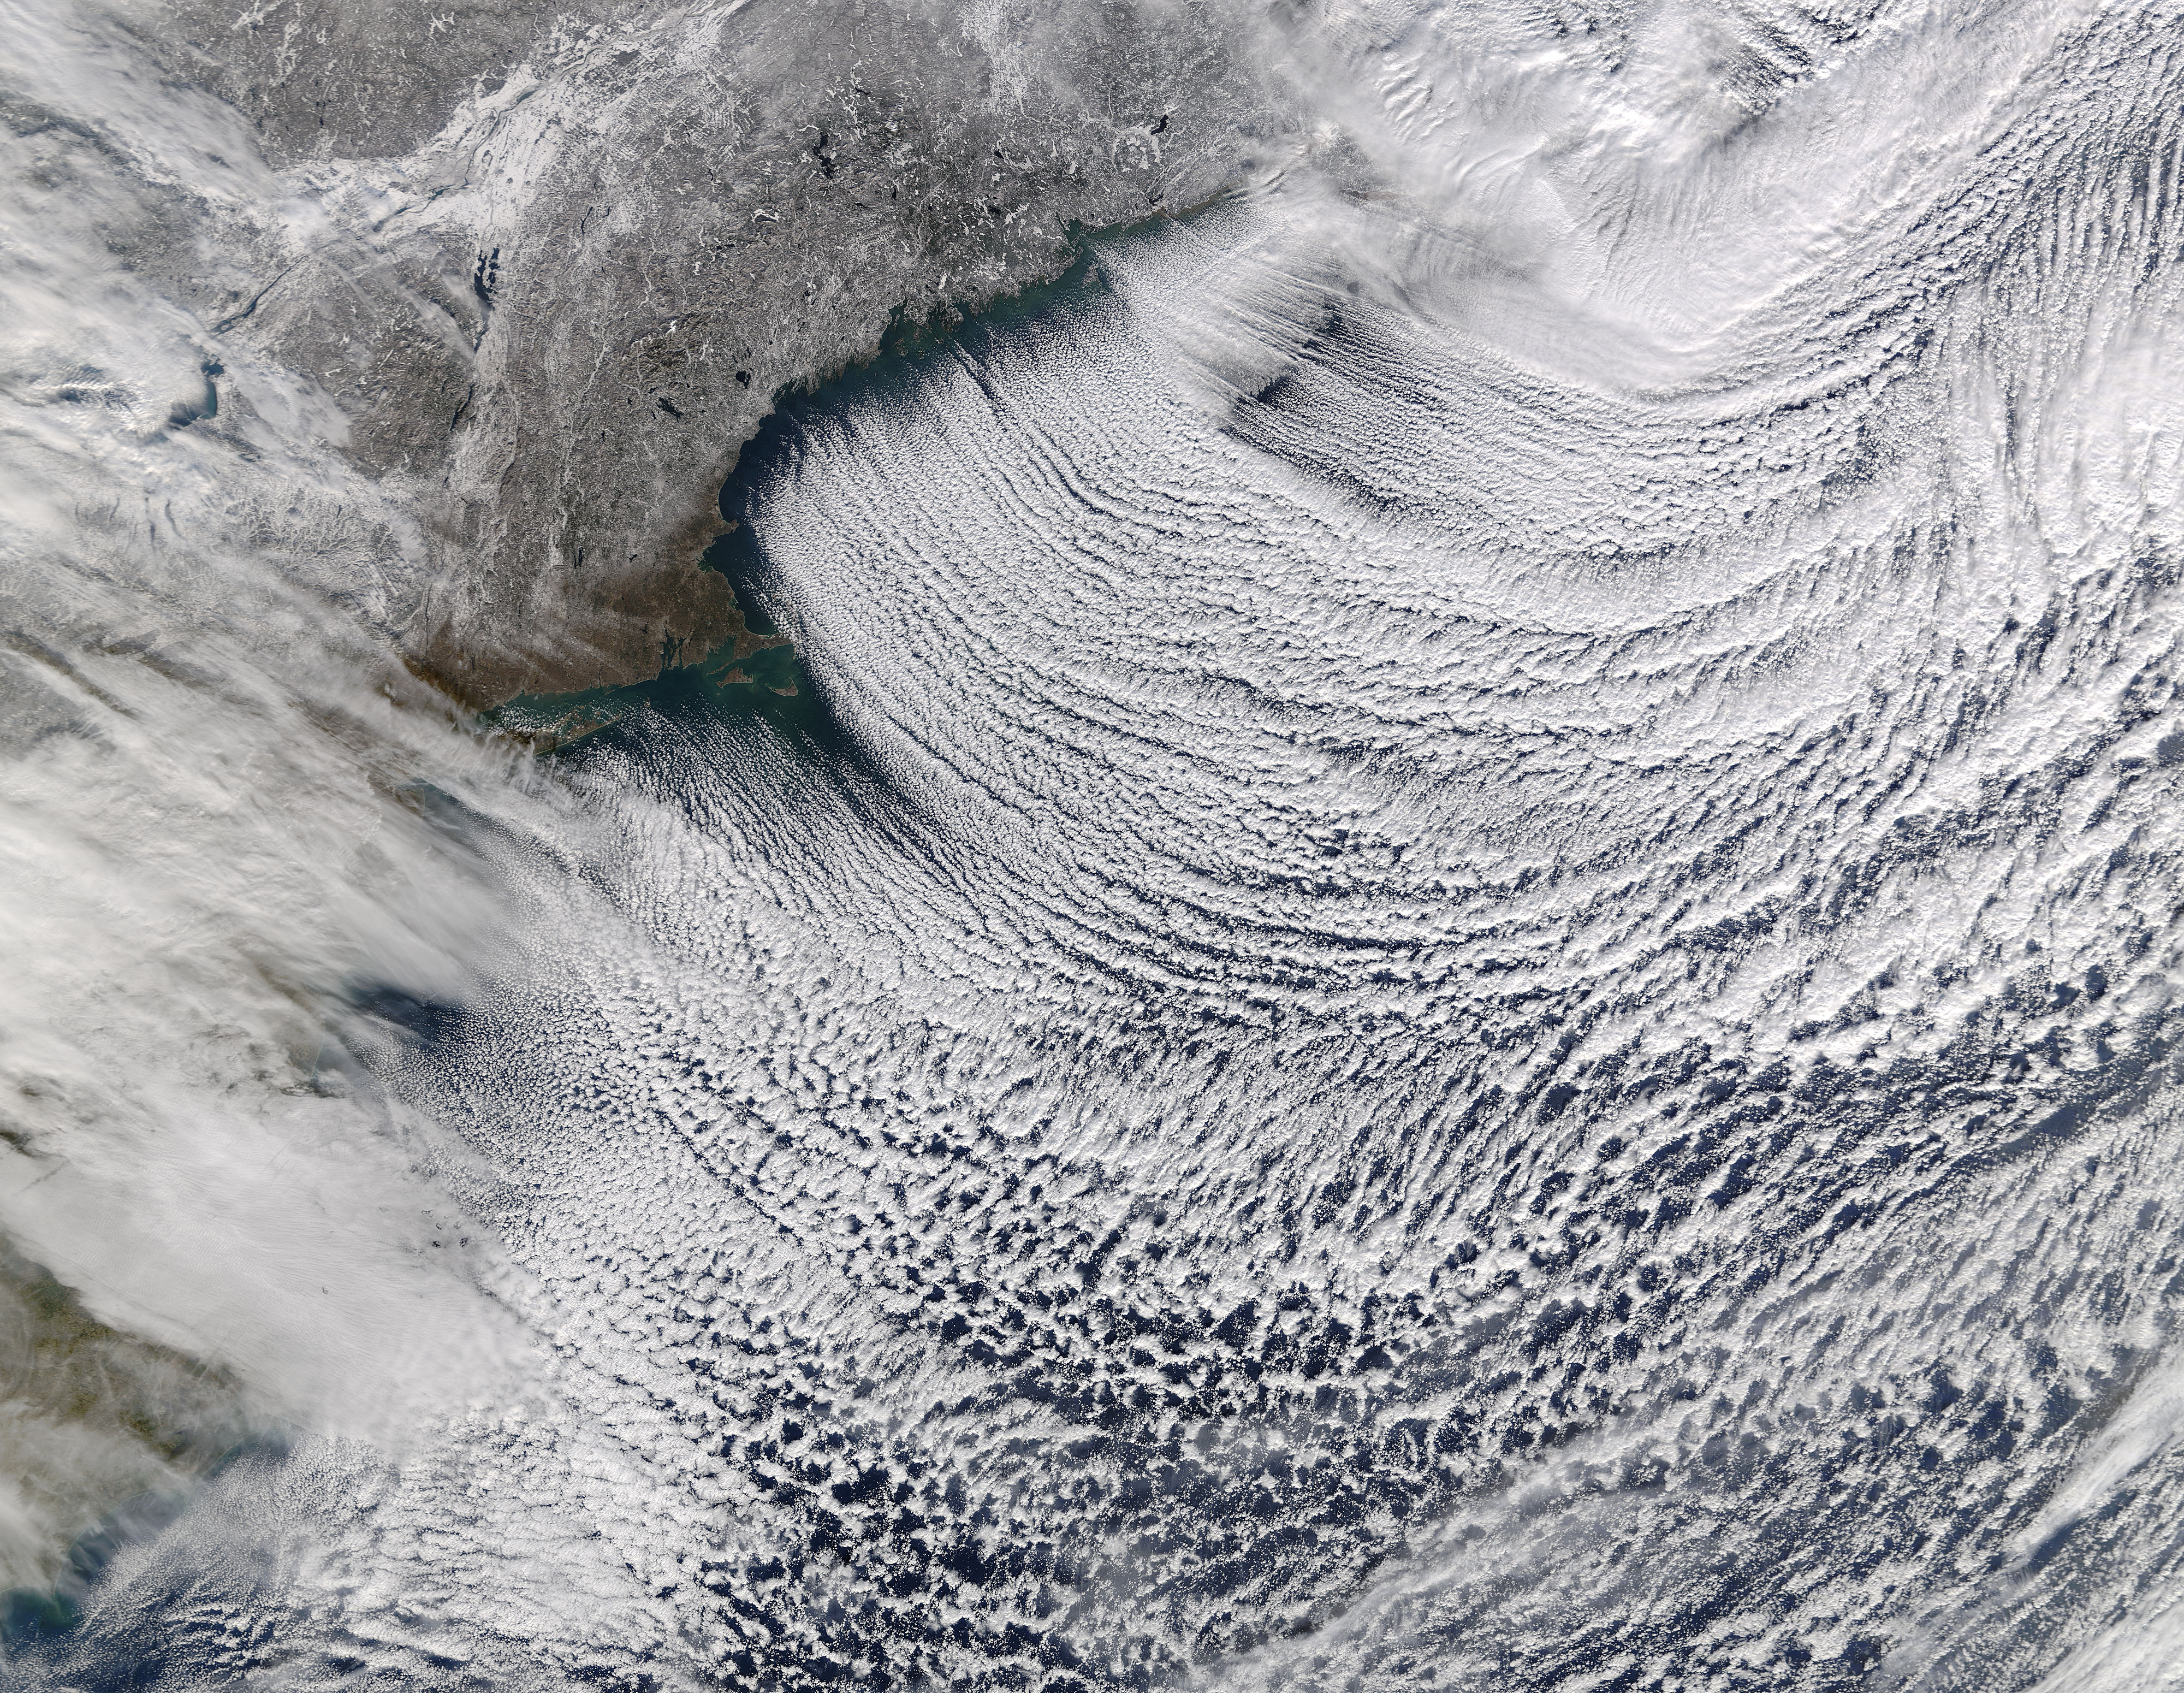 Cloud streets off northeastern United States - related image preview